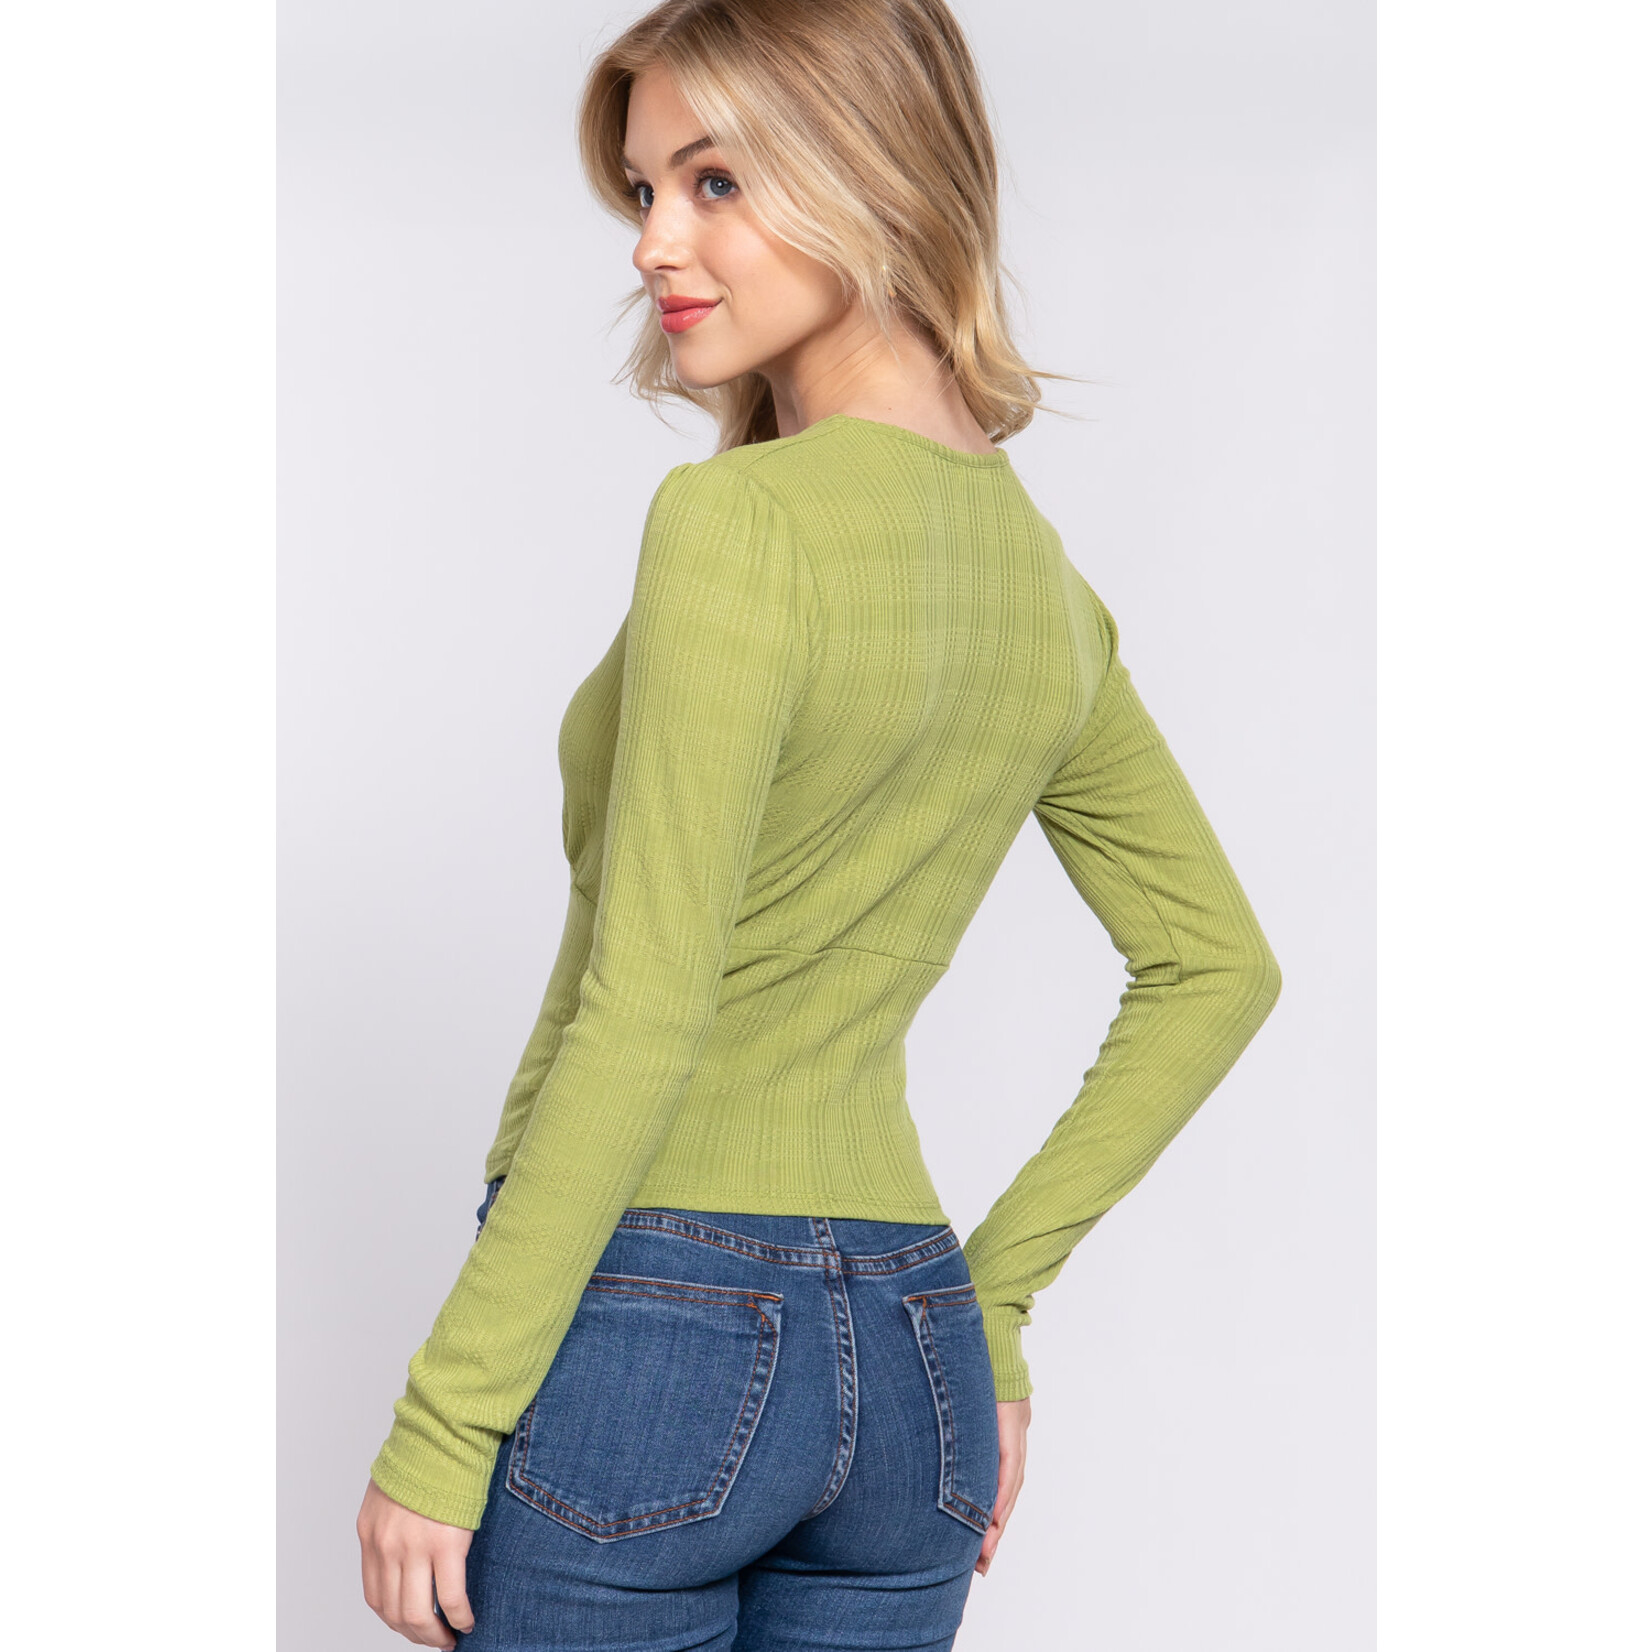 ACTIVE USA, INC. Long Sleeve Front Surplice Knit Top - T13655